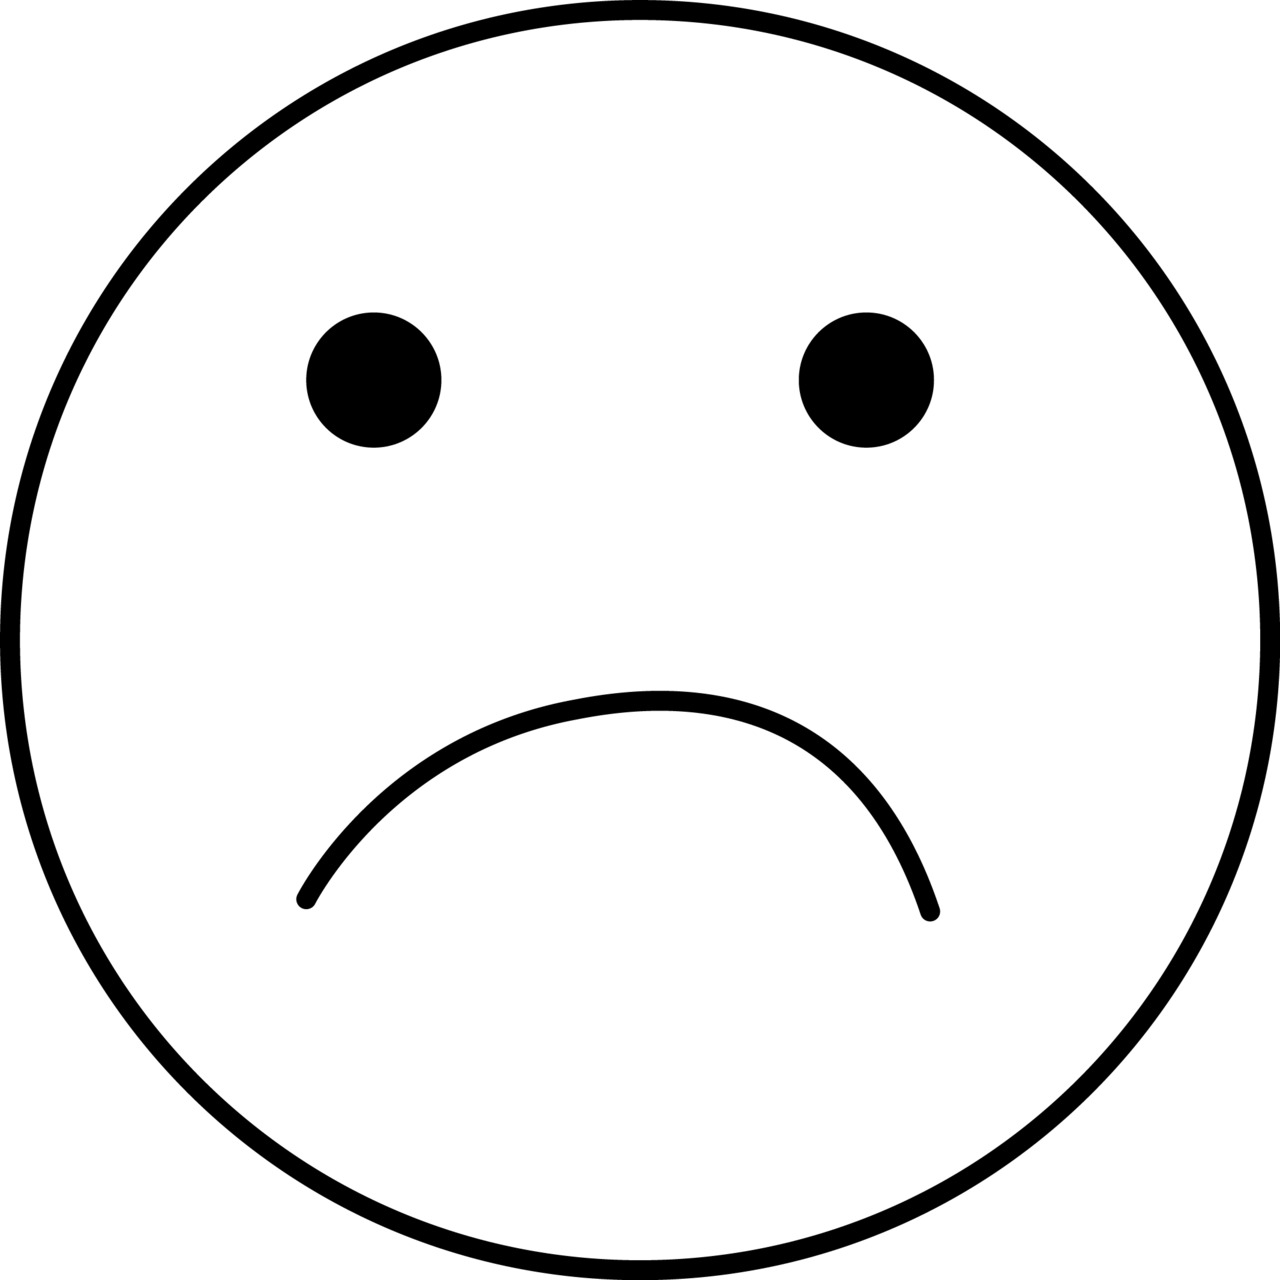 Sad Face Black And White   Clipart Panda   Free Clipart Images